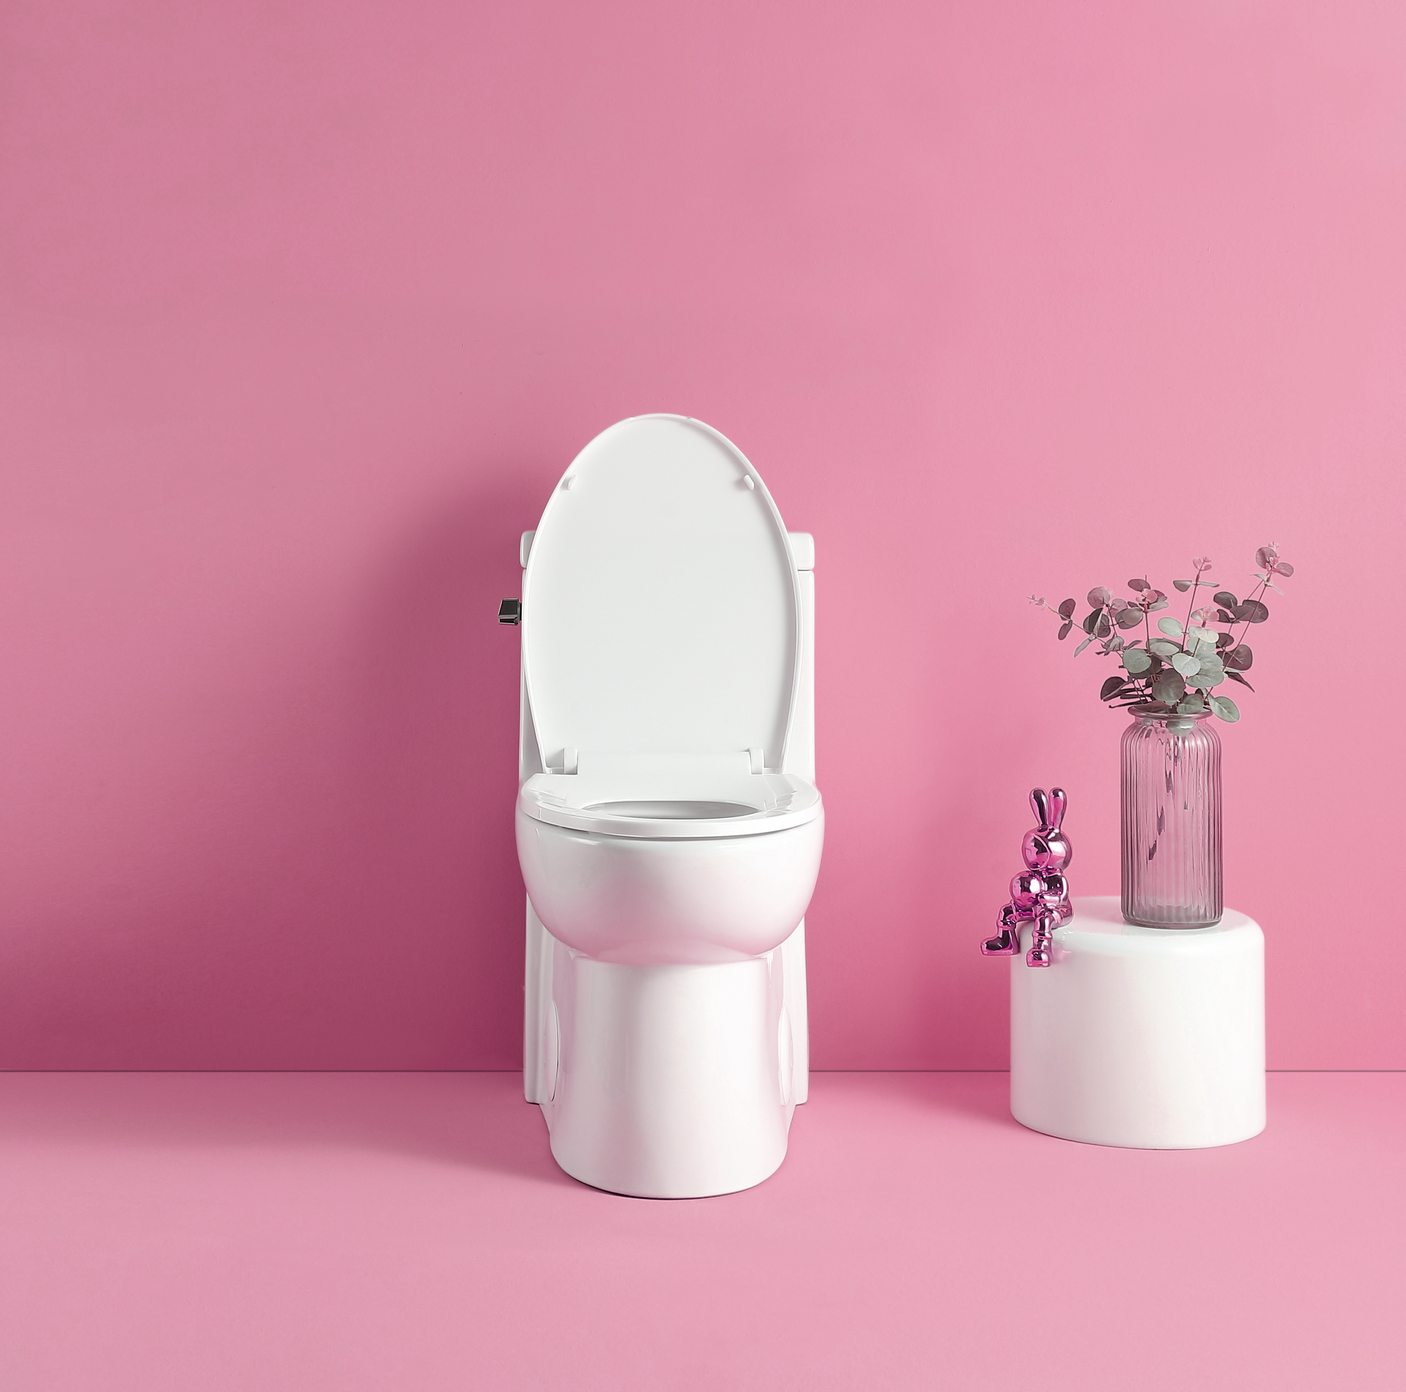 15 1/8 Inch 1.28 GPF 1-Piece Elongated Toilet with Soft-Close Seat - Gloss White  23T03-GW